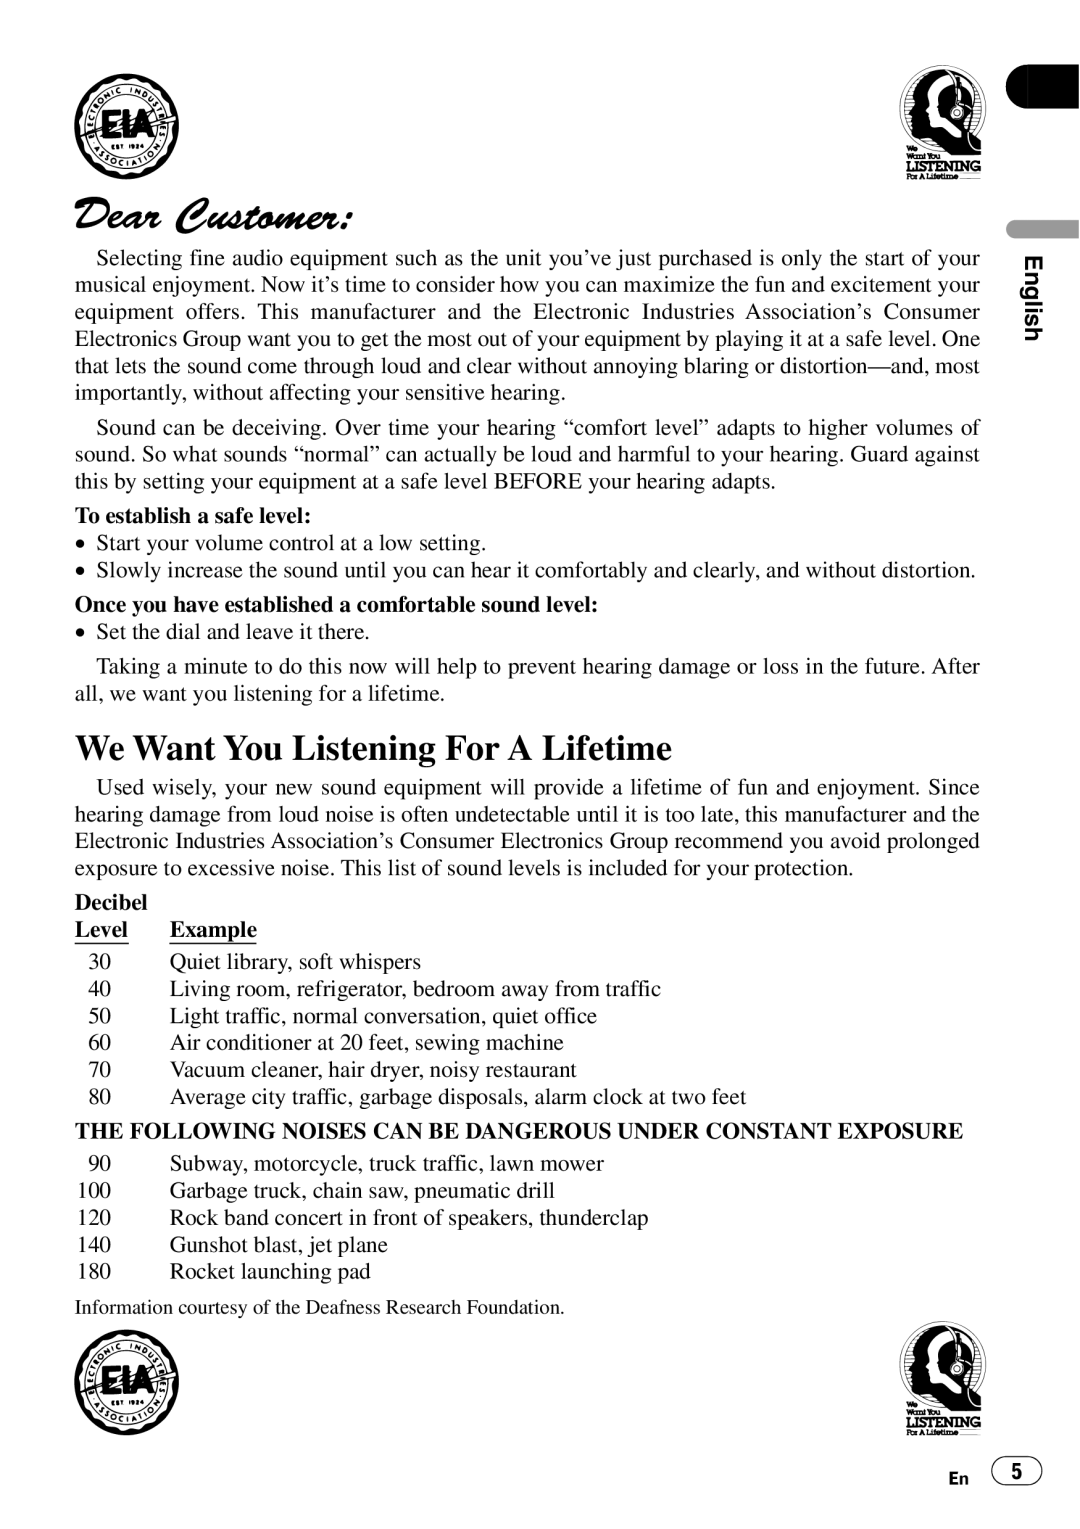 Pioneer DEH-P860MP operation manual We Want You Listening For A Lifetime, To establish a safe level, Decibel Level Example 